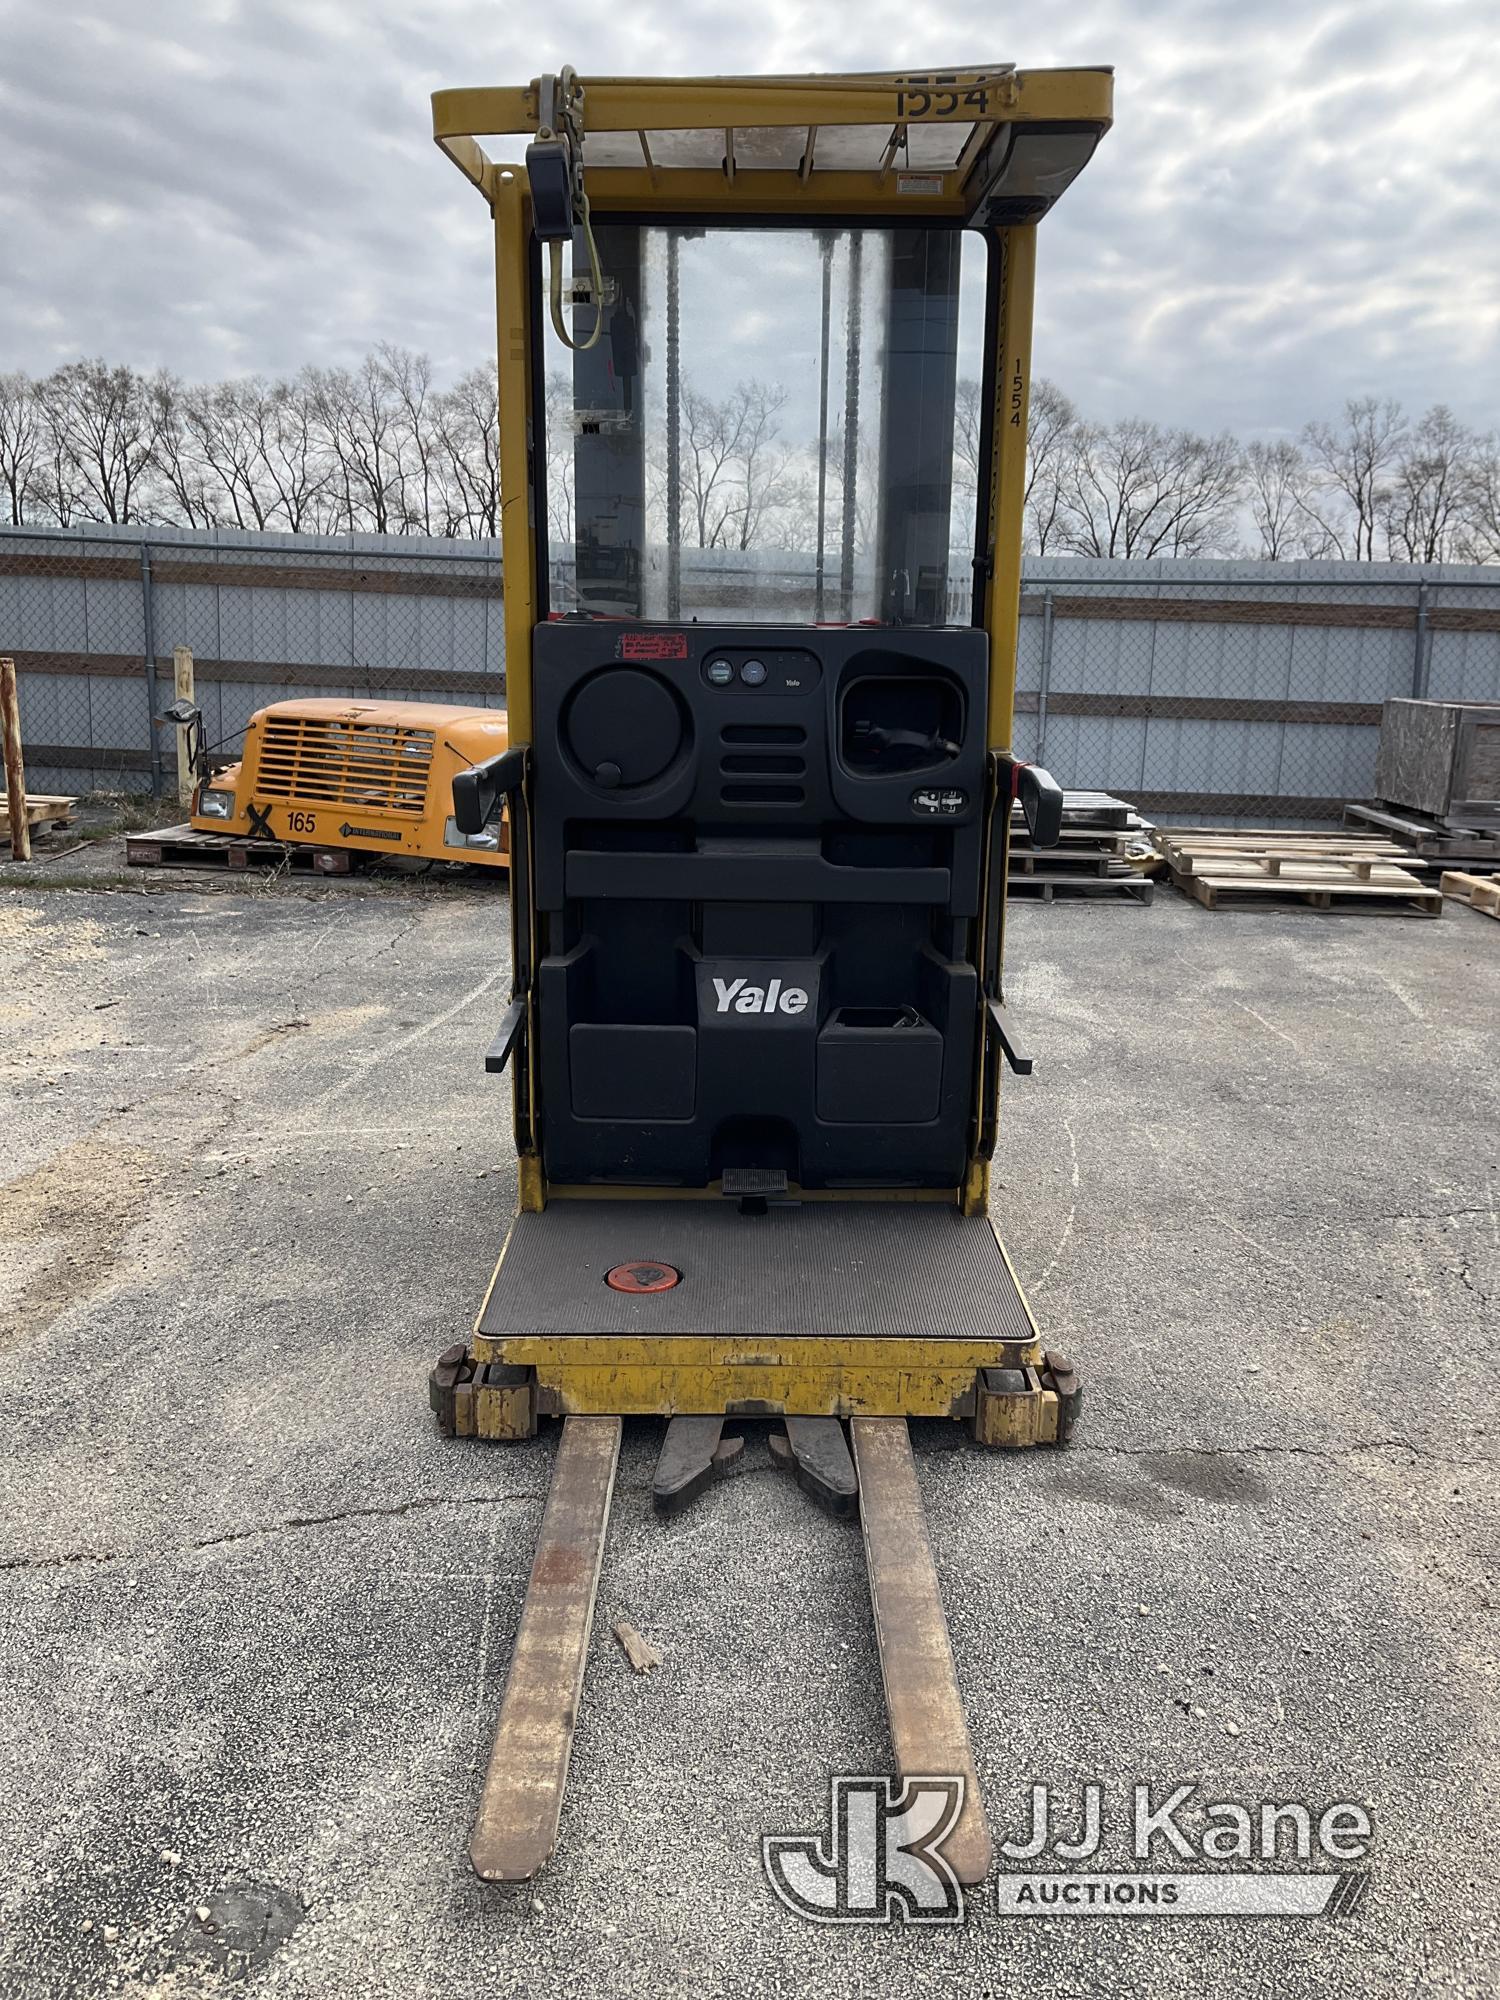 (South Beloit, IL) 2005 Yale Stand-Up Narrow Aisle Forklift Order Picker Runs, Moves) (Does Not Lift